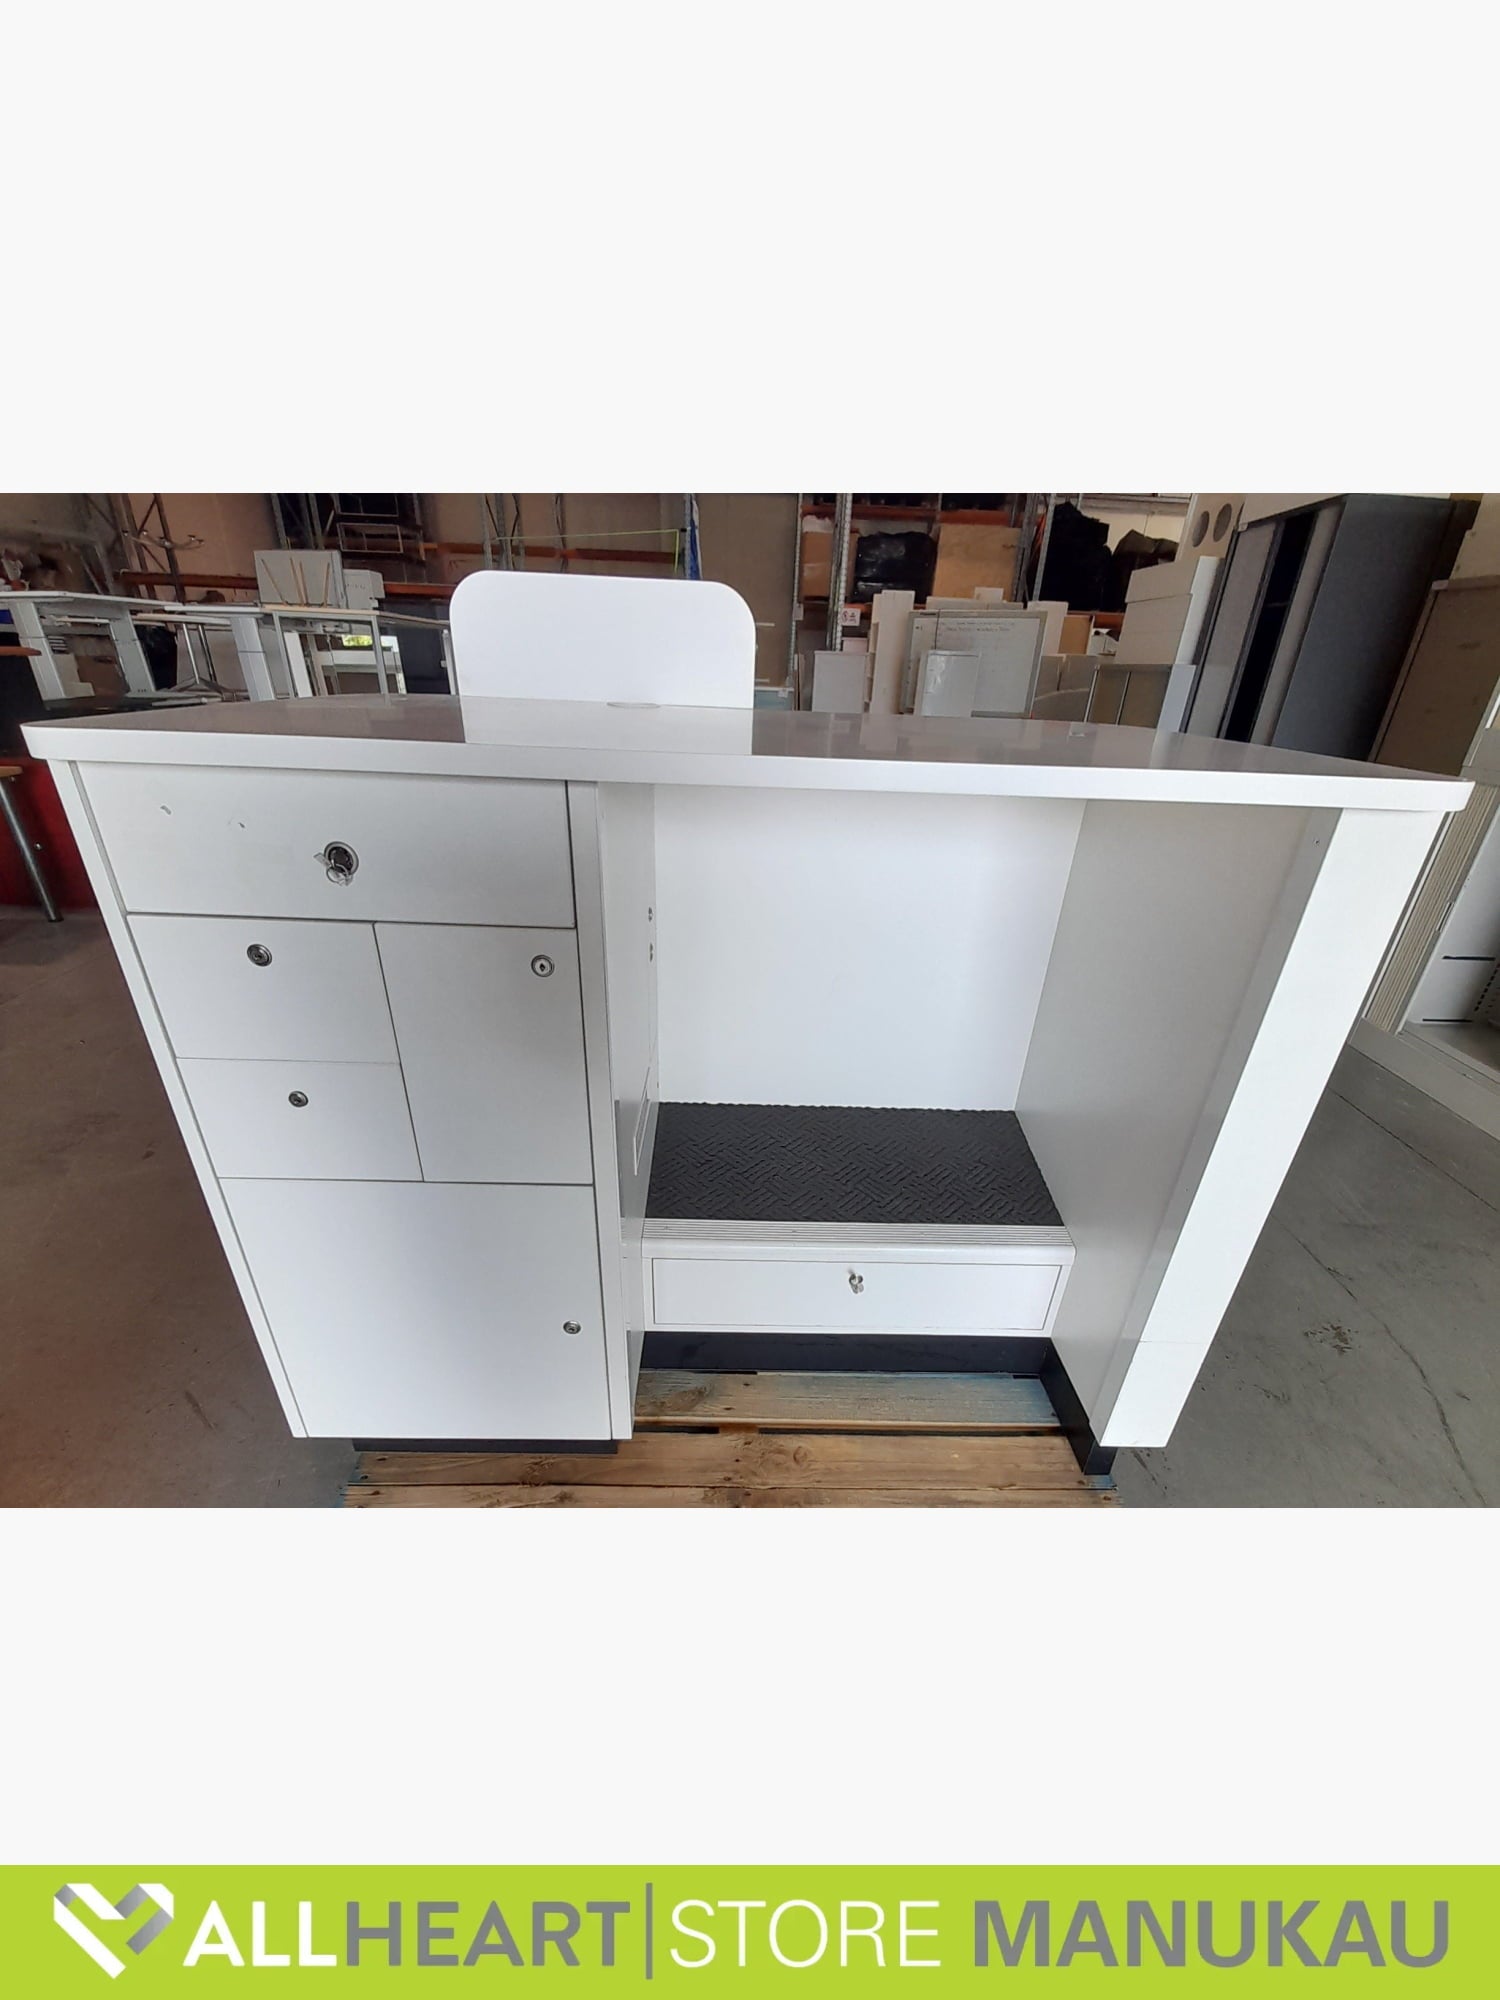 Standing Reception Desk - White - With Key